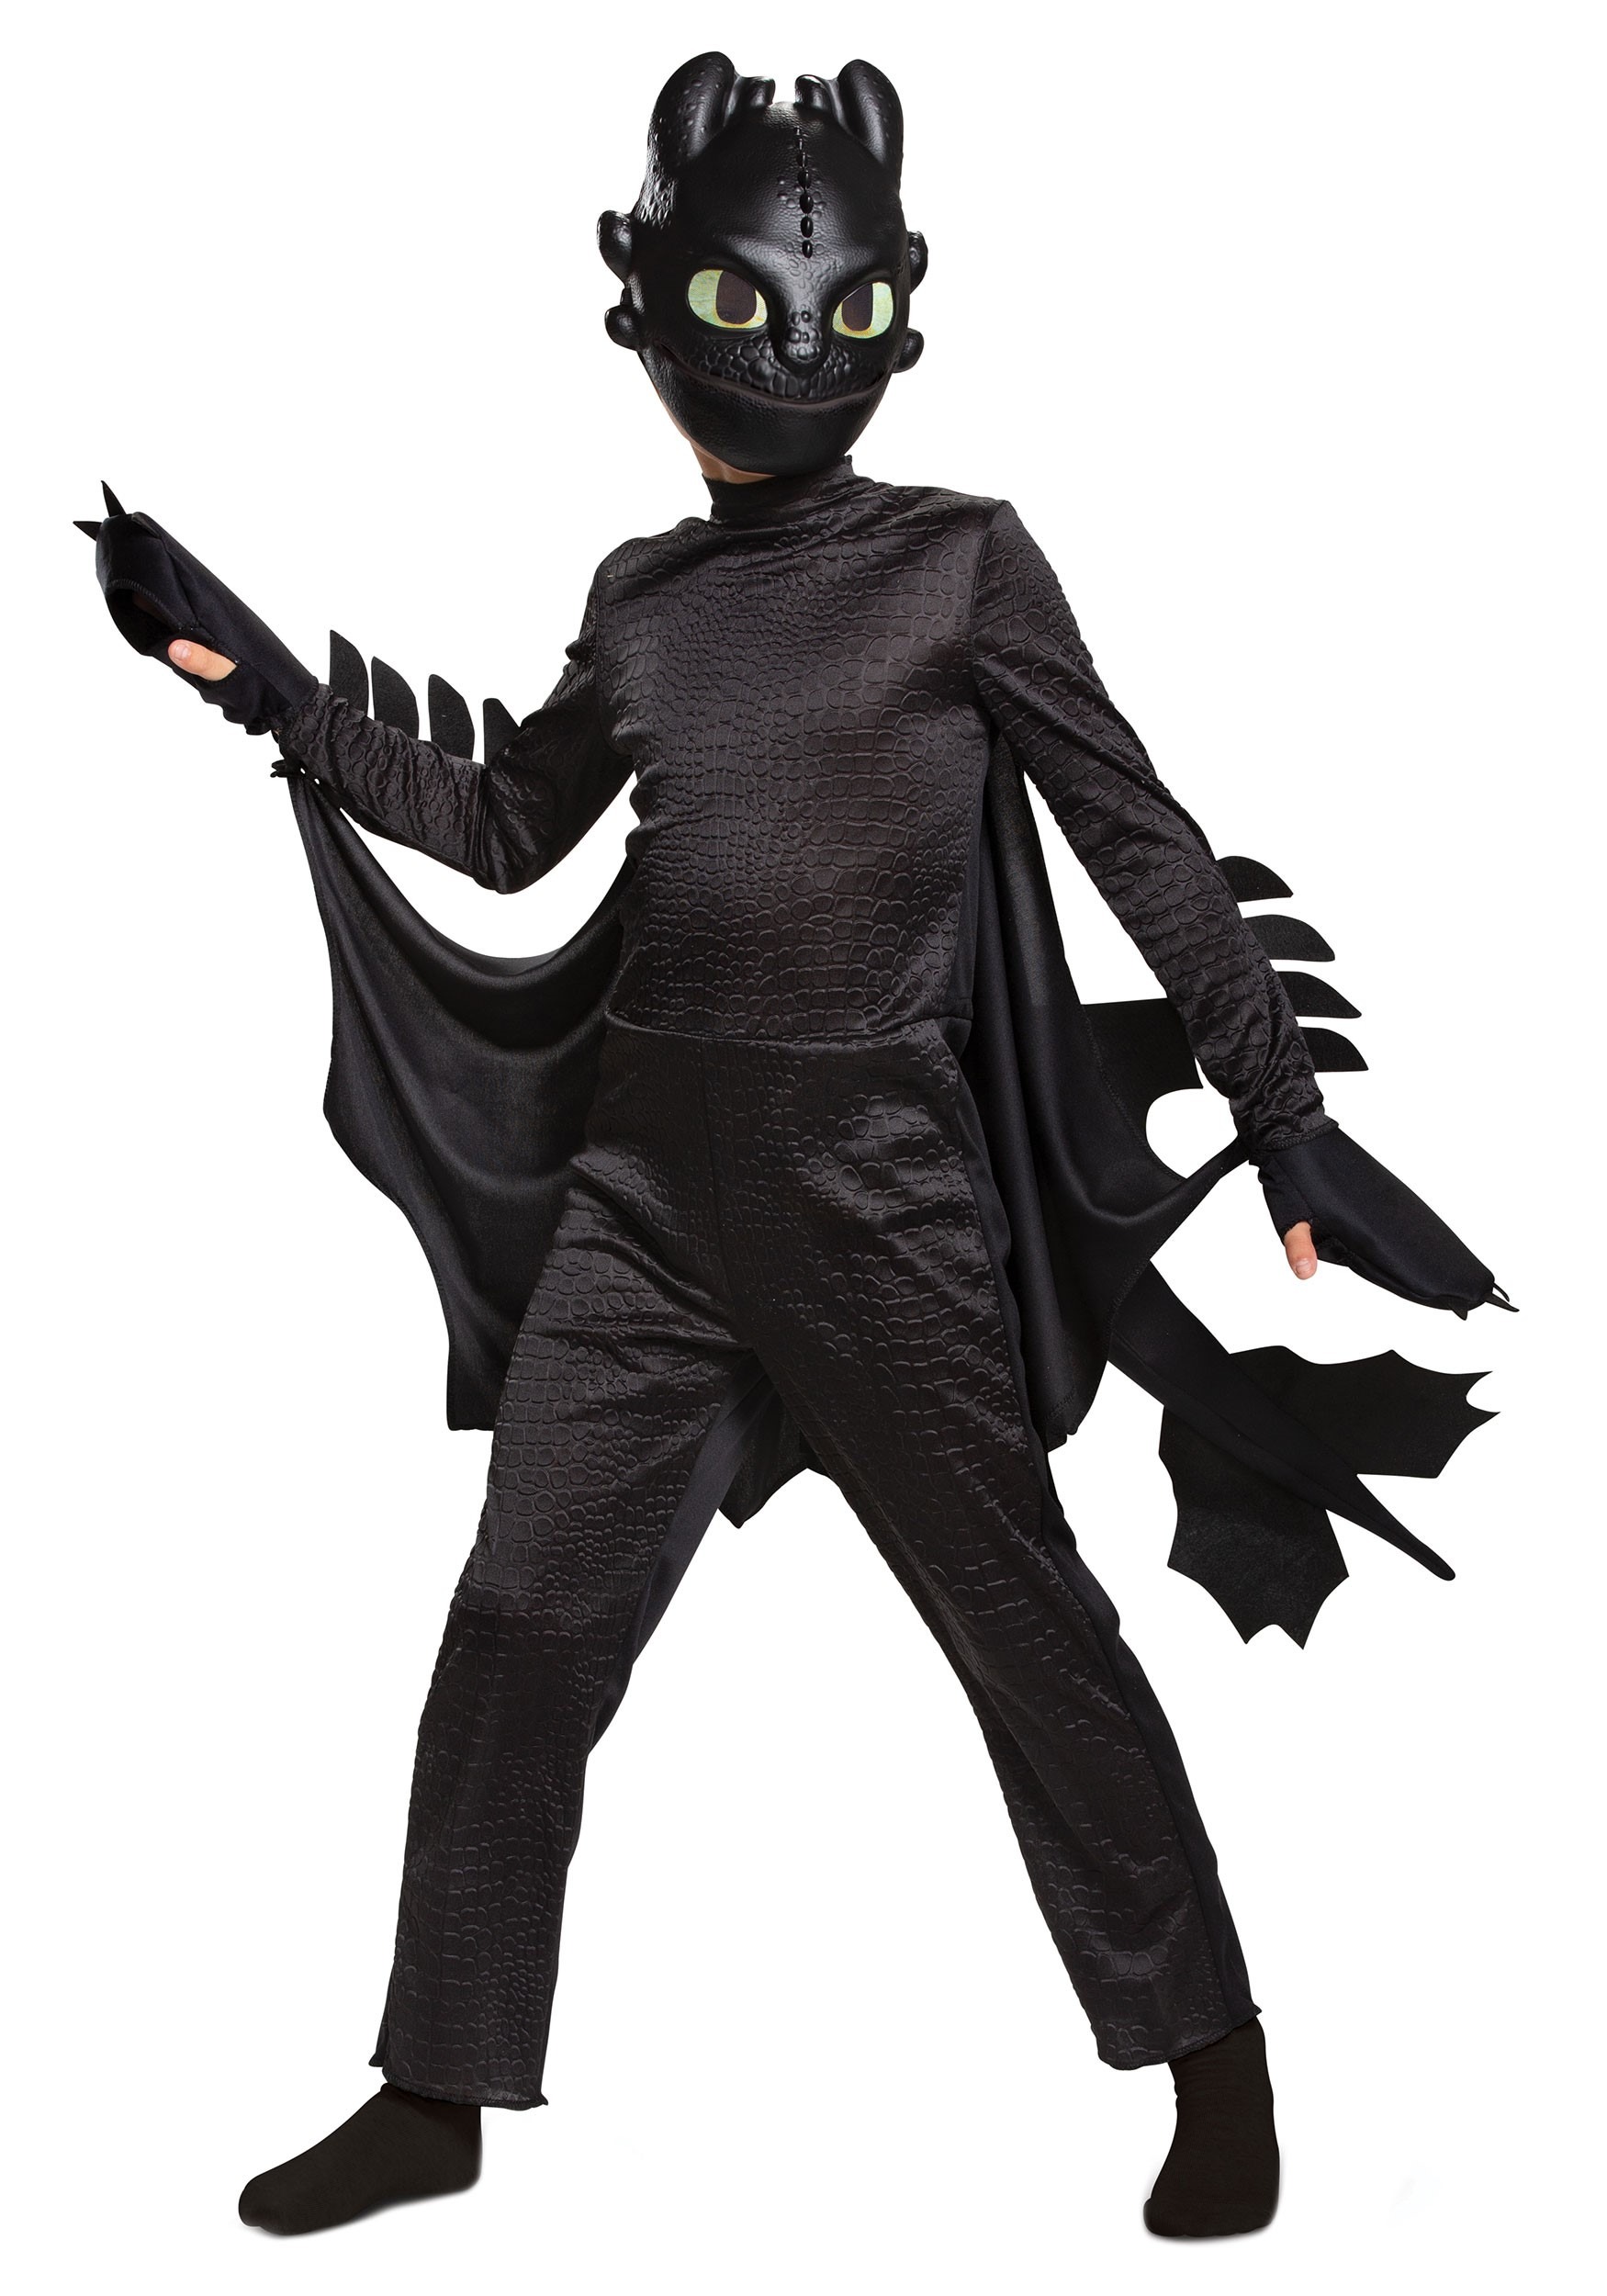 How To Train Your Dragon Deluxe Toothless Kids Costume Licensed Cosplay XS-MD